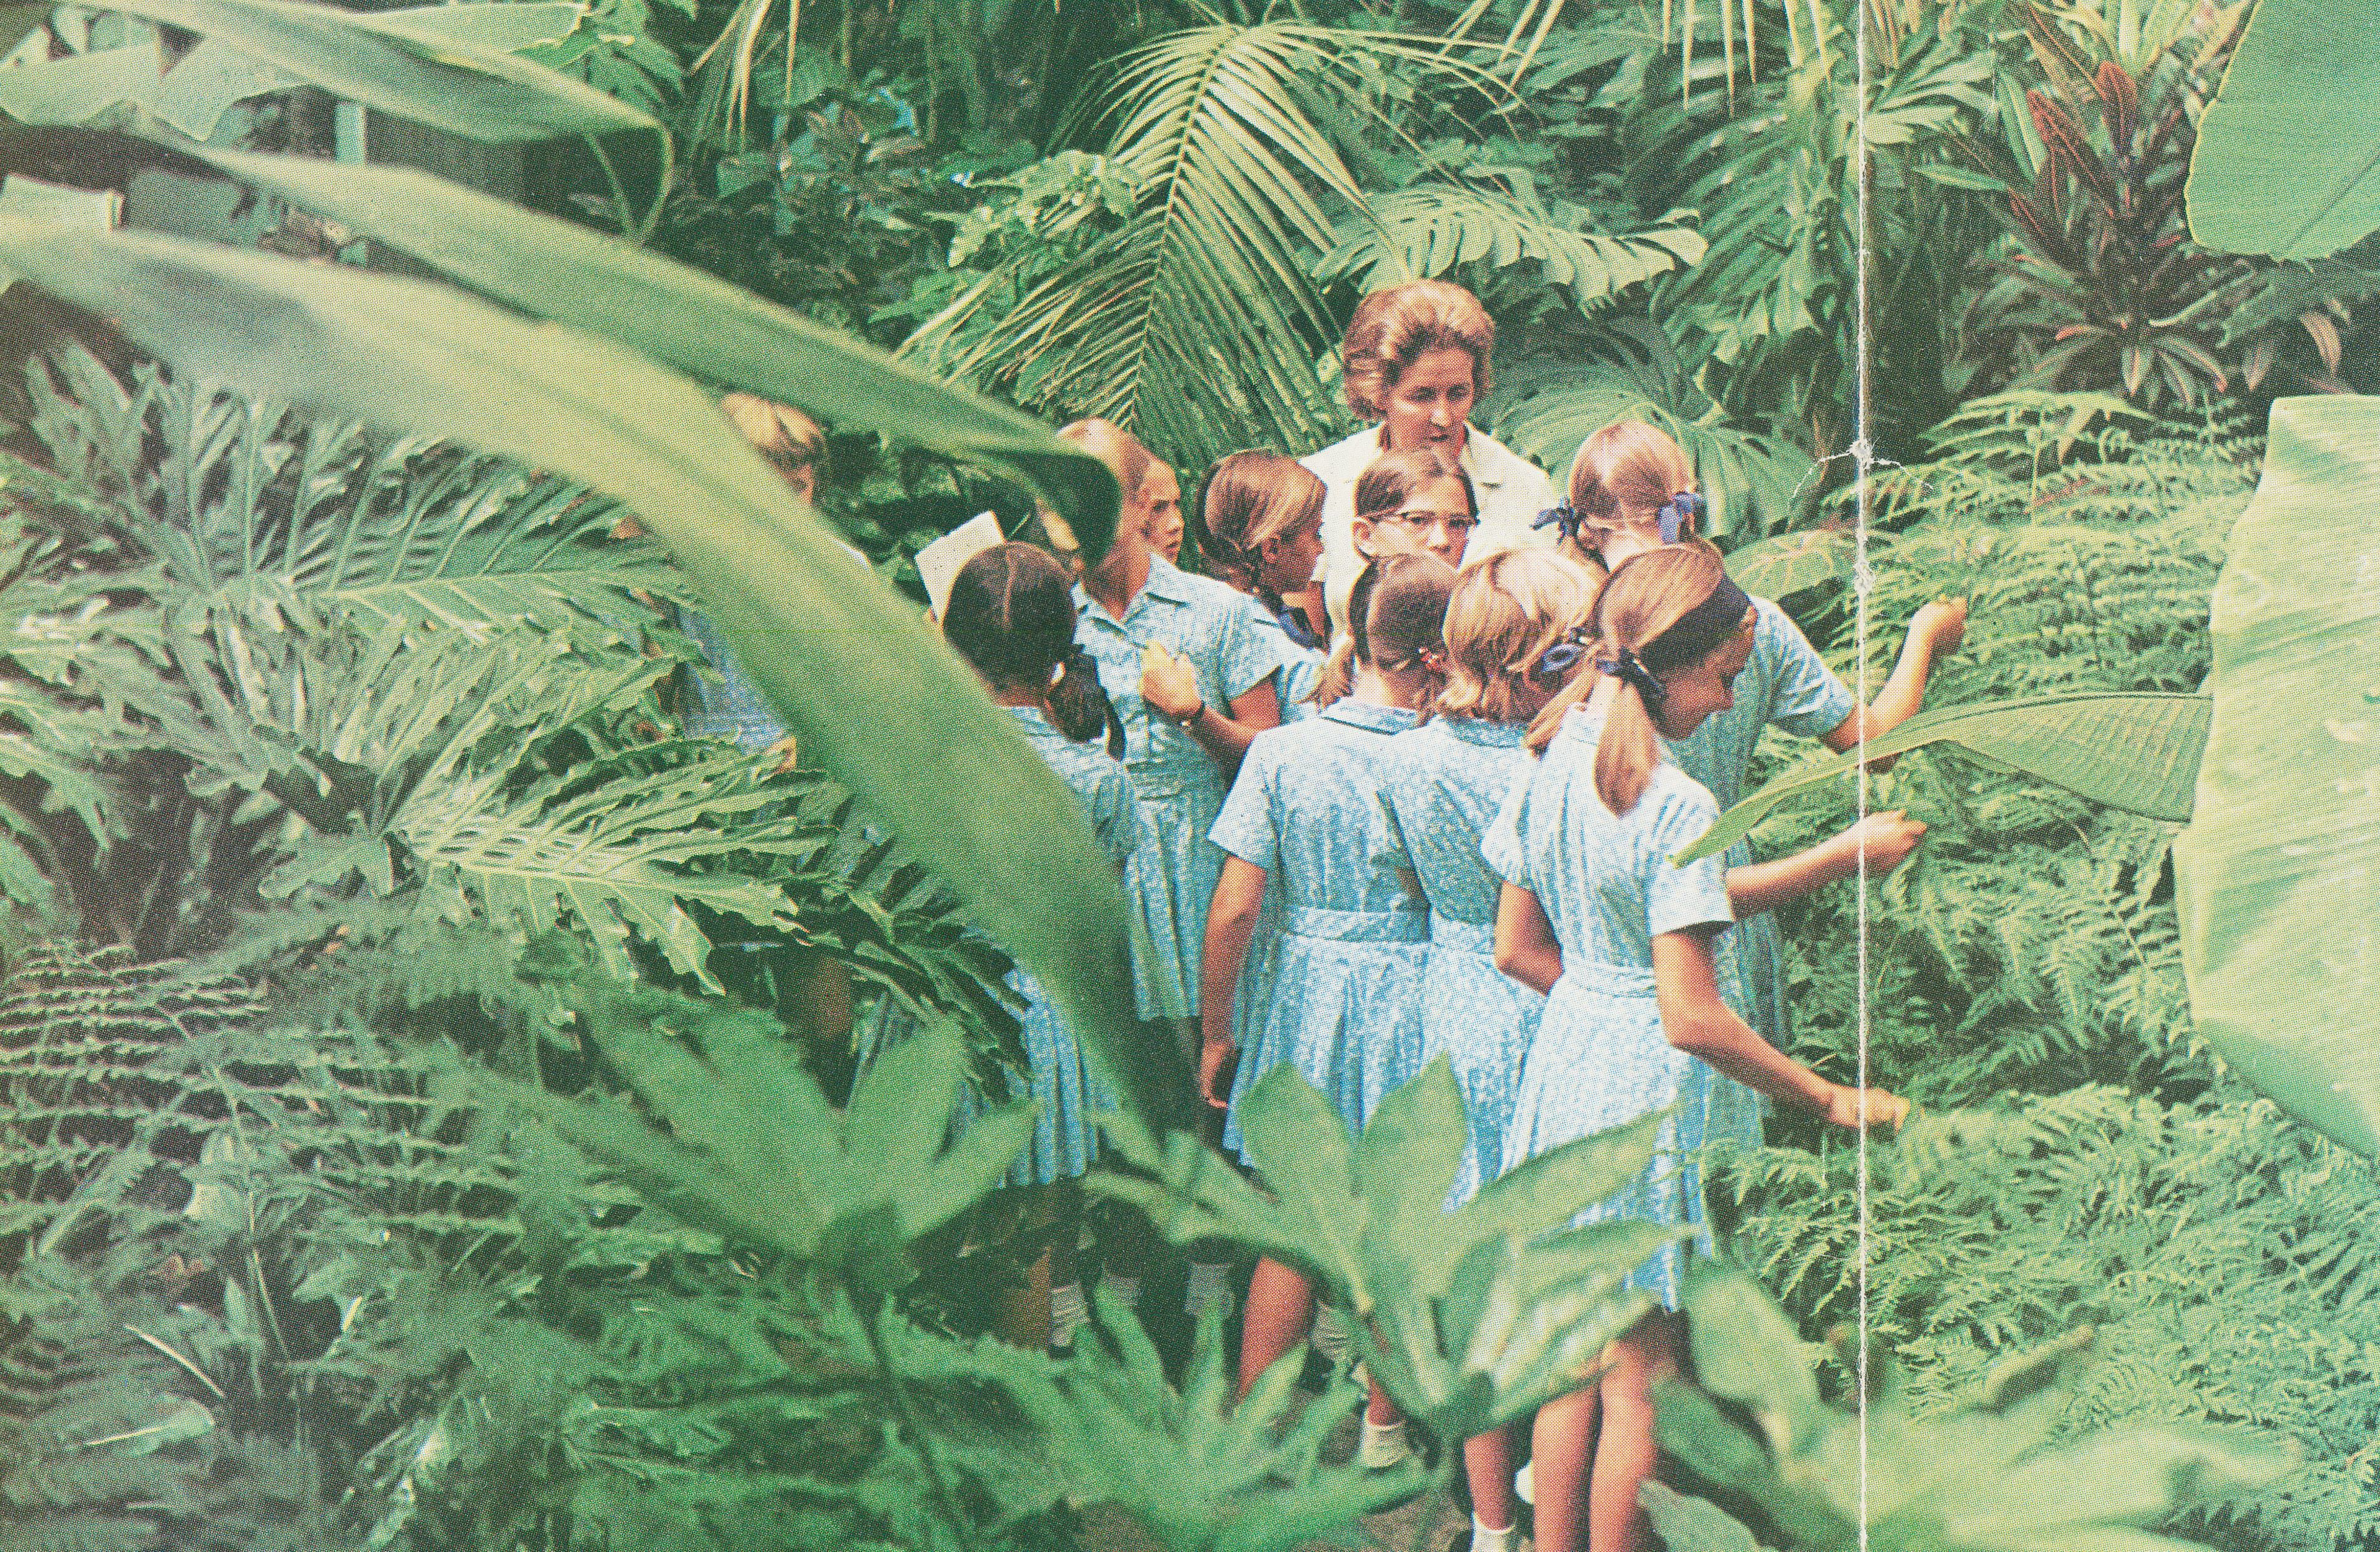 Spread group of girls walking through jungle